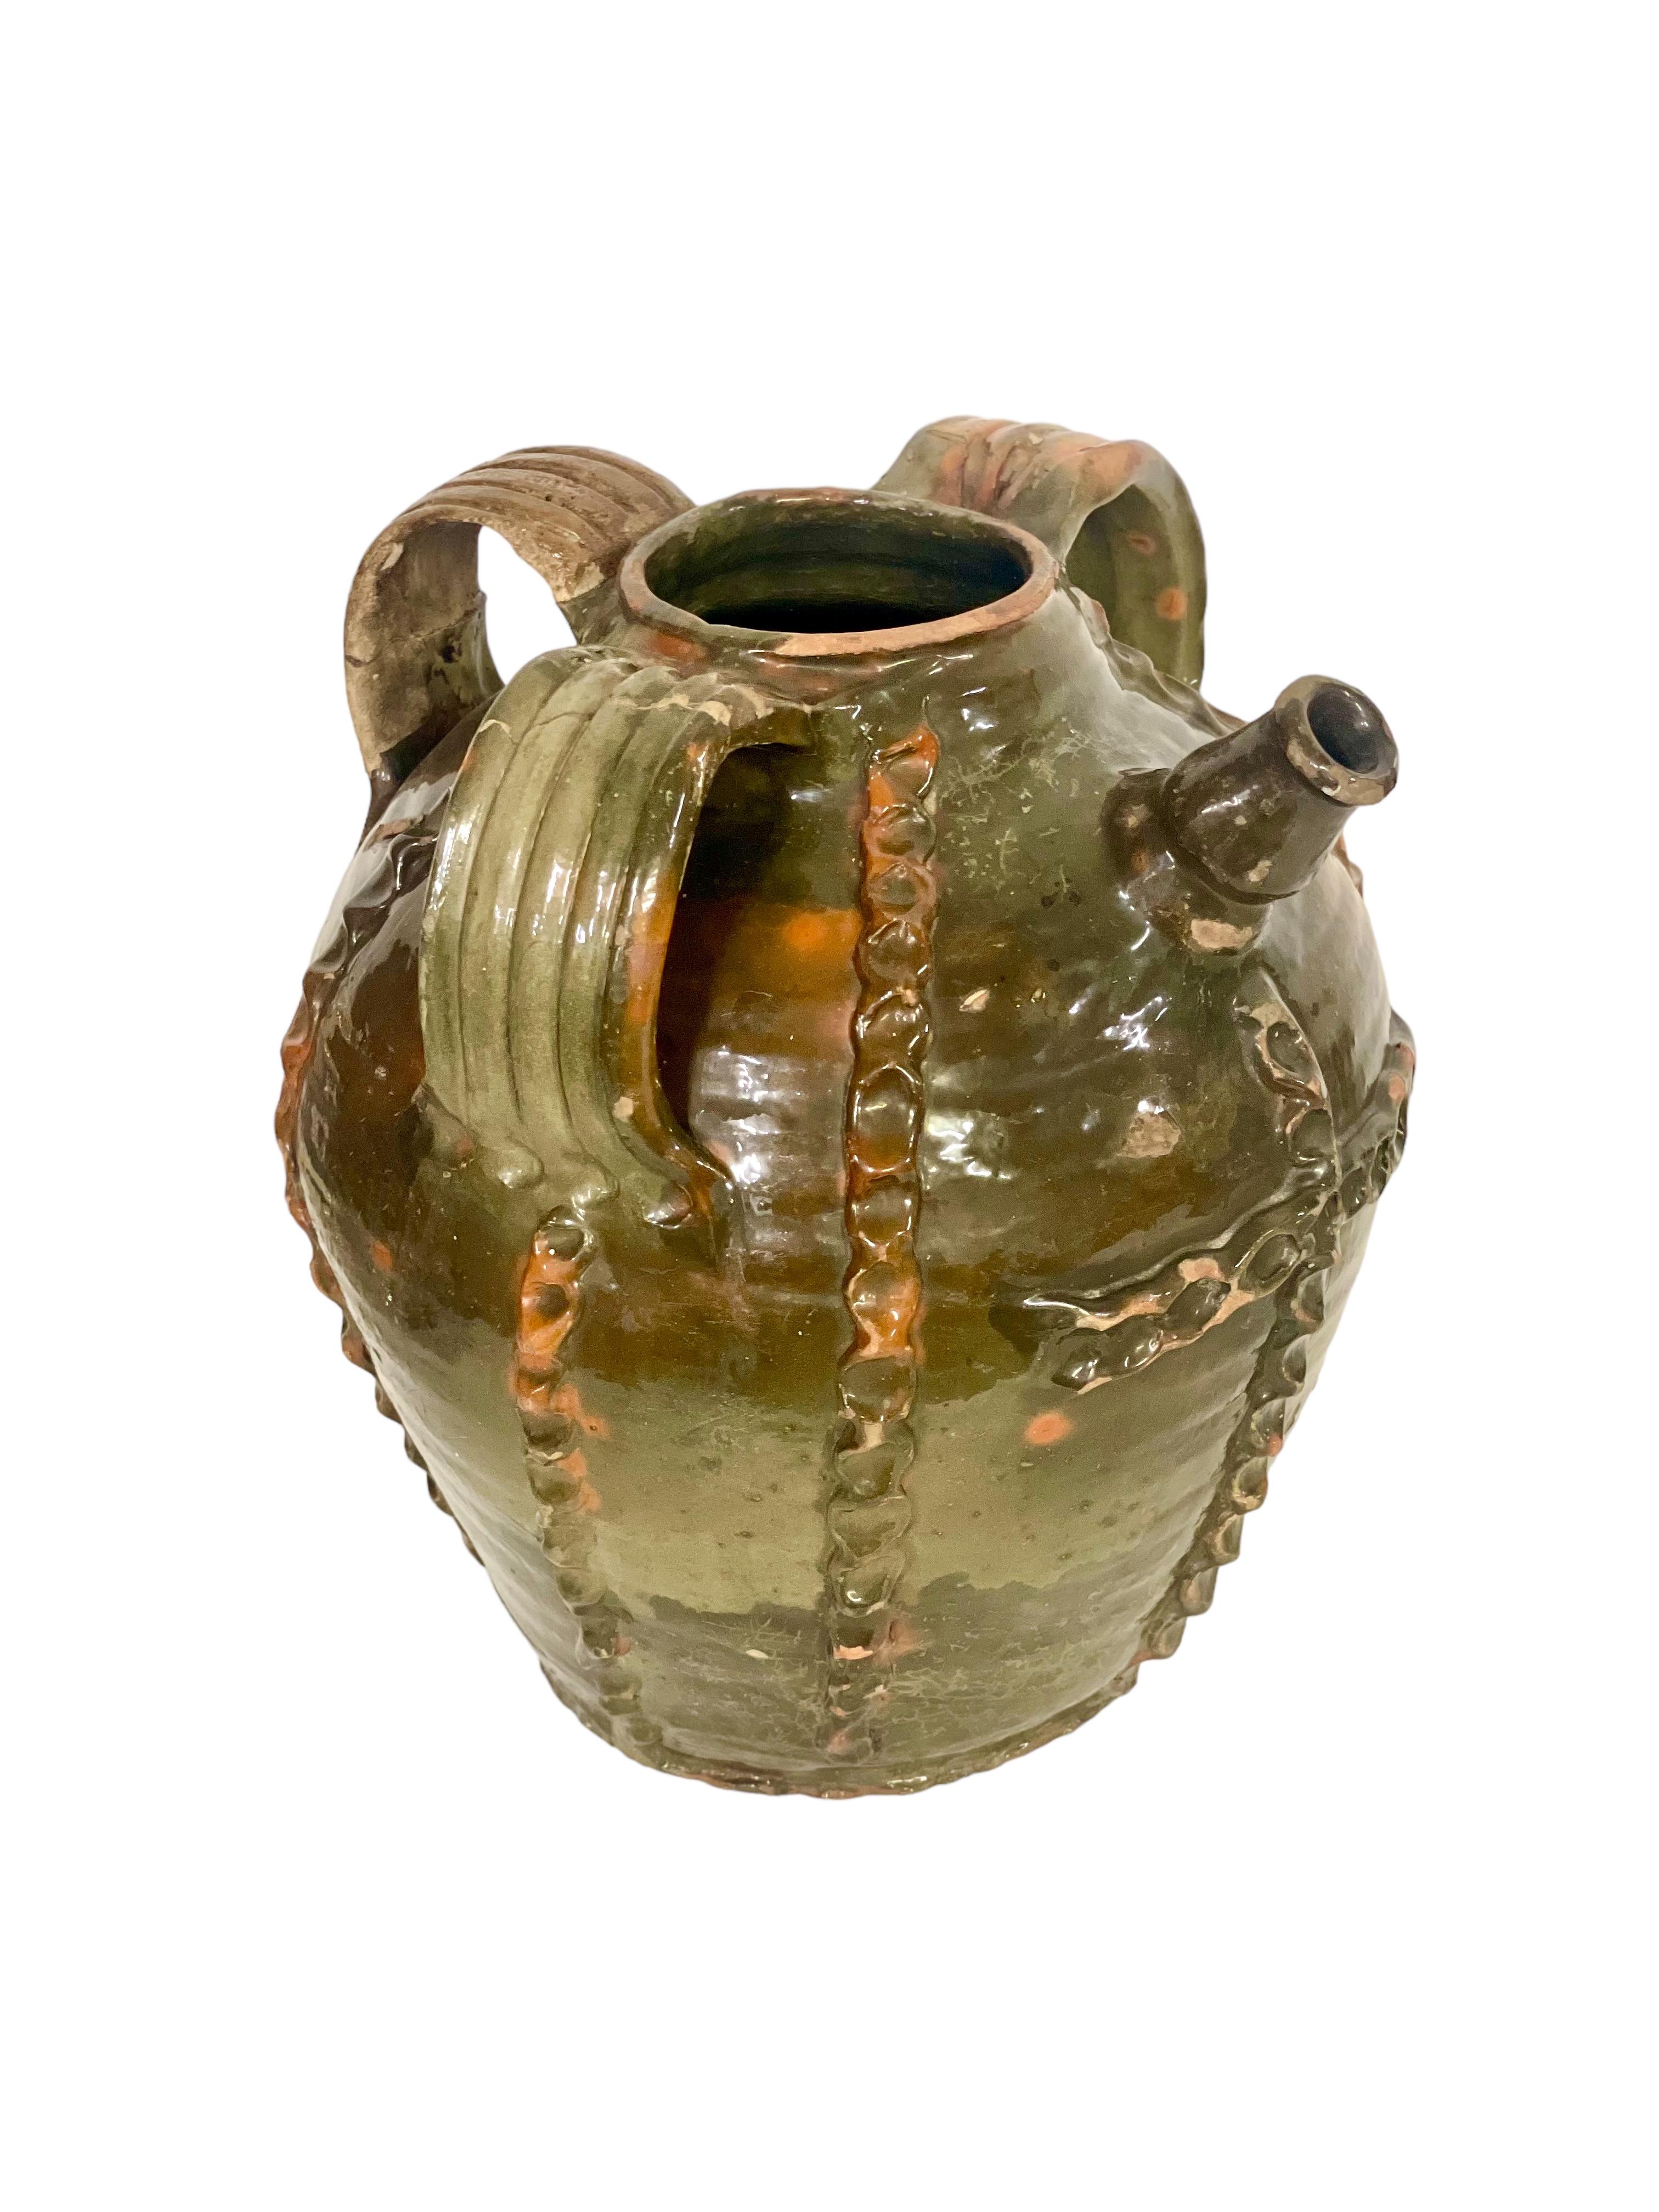 This is a fabulous example of a large 18th century French walnut oil jar, with three decorative handles and short pouring spout. Retaining its original dusky-green glaze, the jar is embellished with vertical strips in an exceptionally decorative